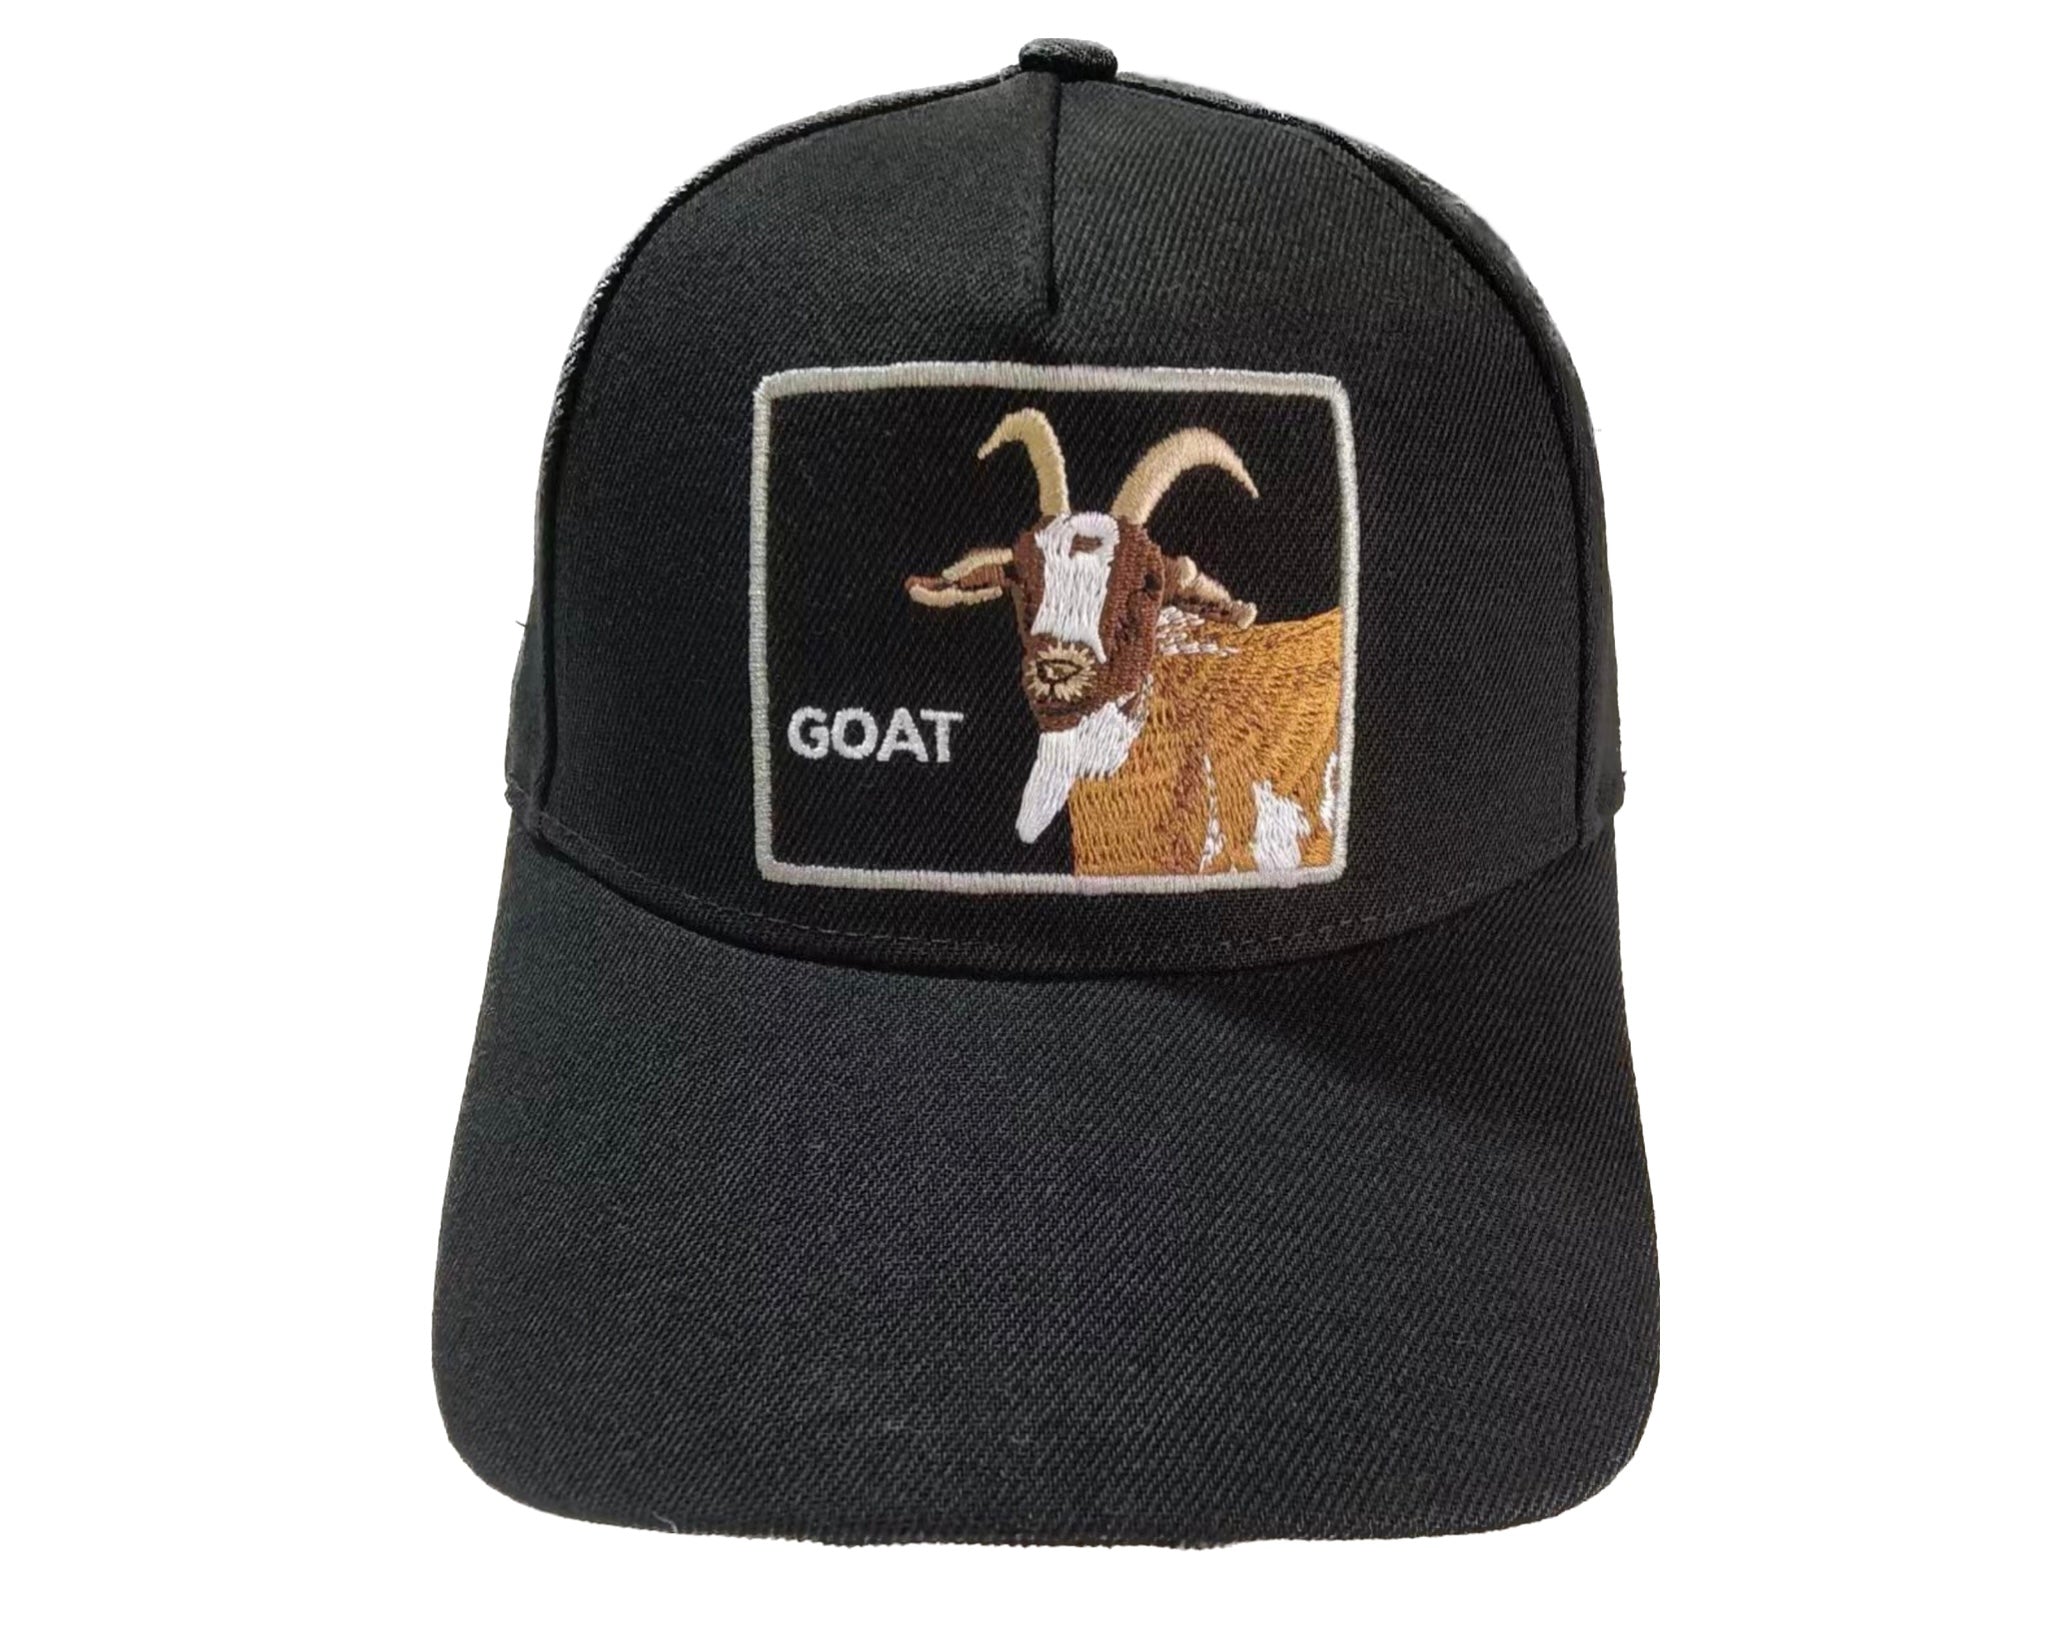 Limited Goat Embroidery Design